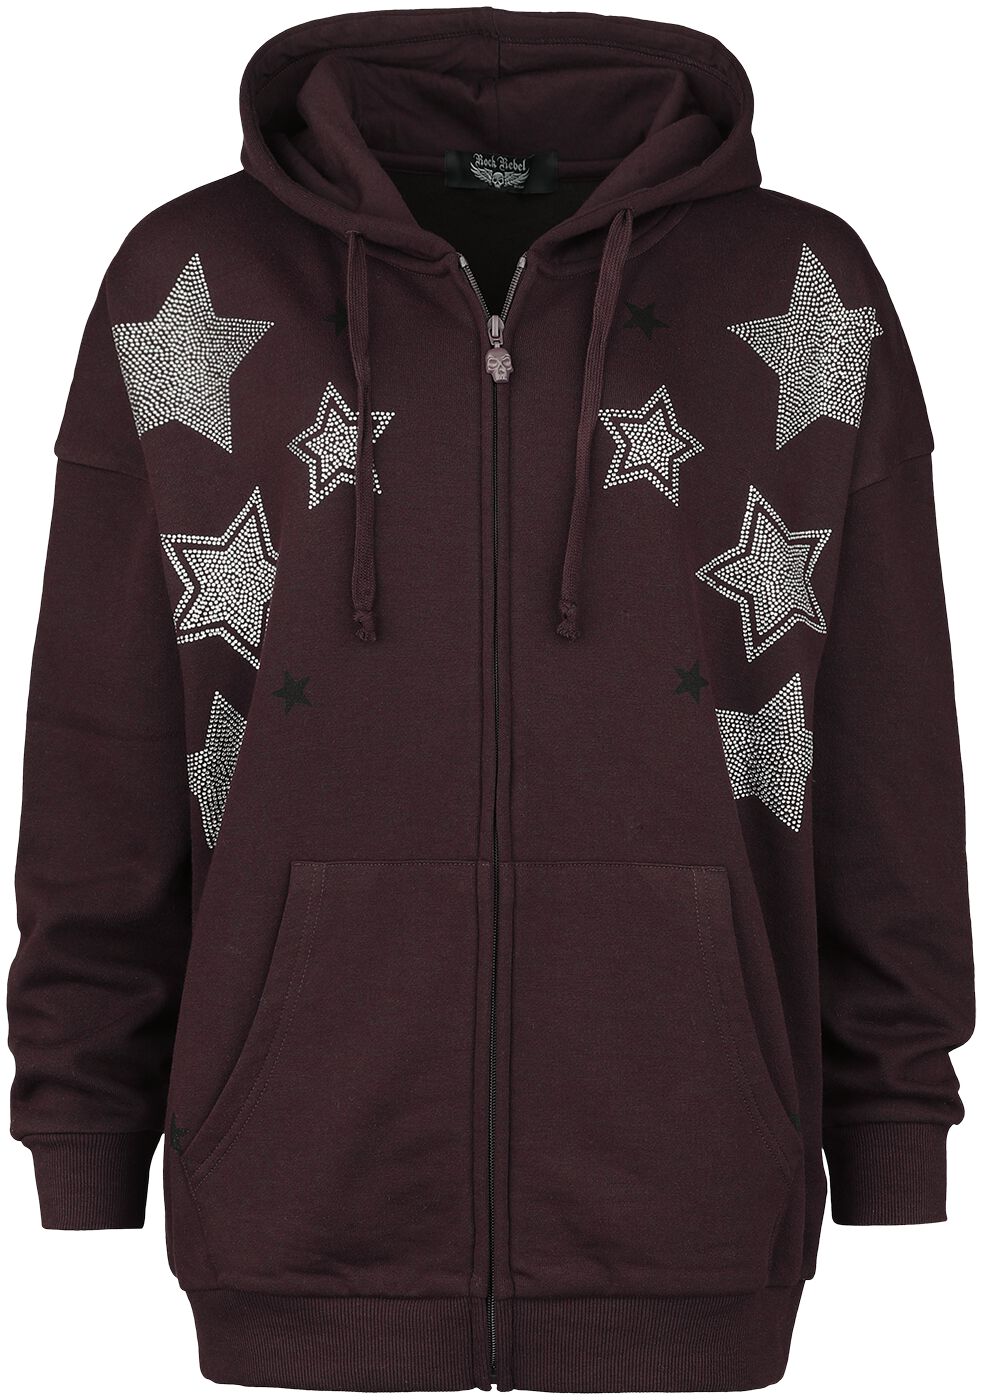 Image of Felpa jogging di Rock Rebel by EMP - Hoodie with stars - S a XXL - Donna - bordeaux